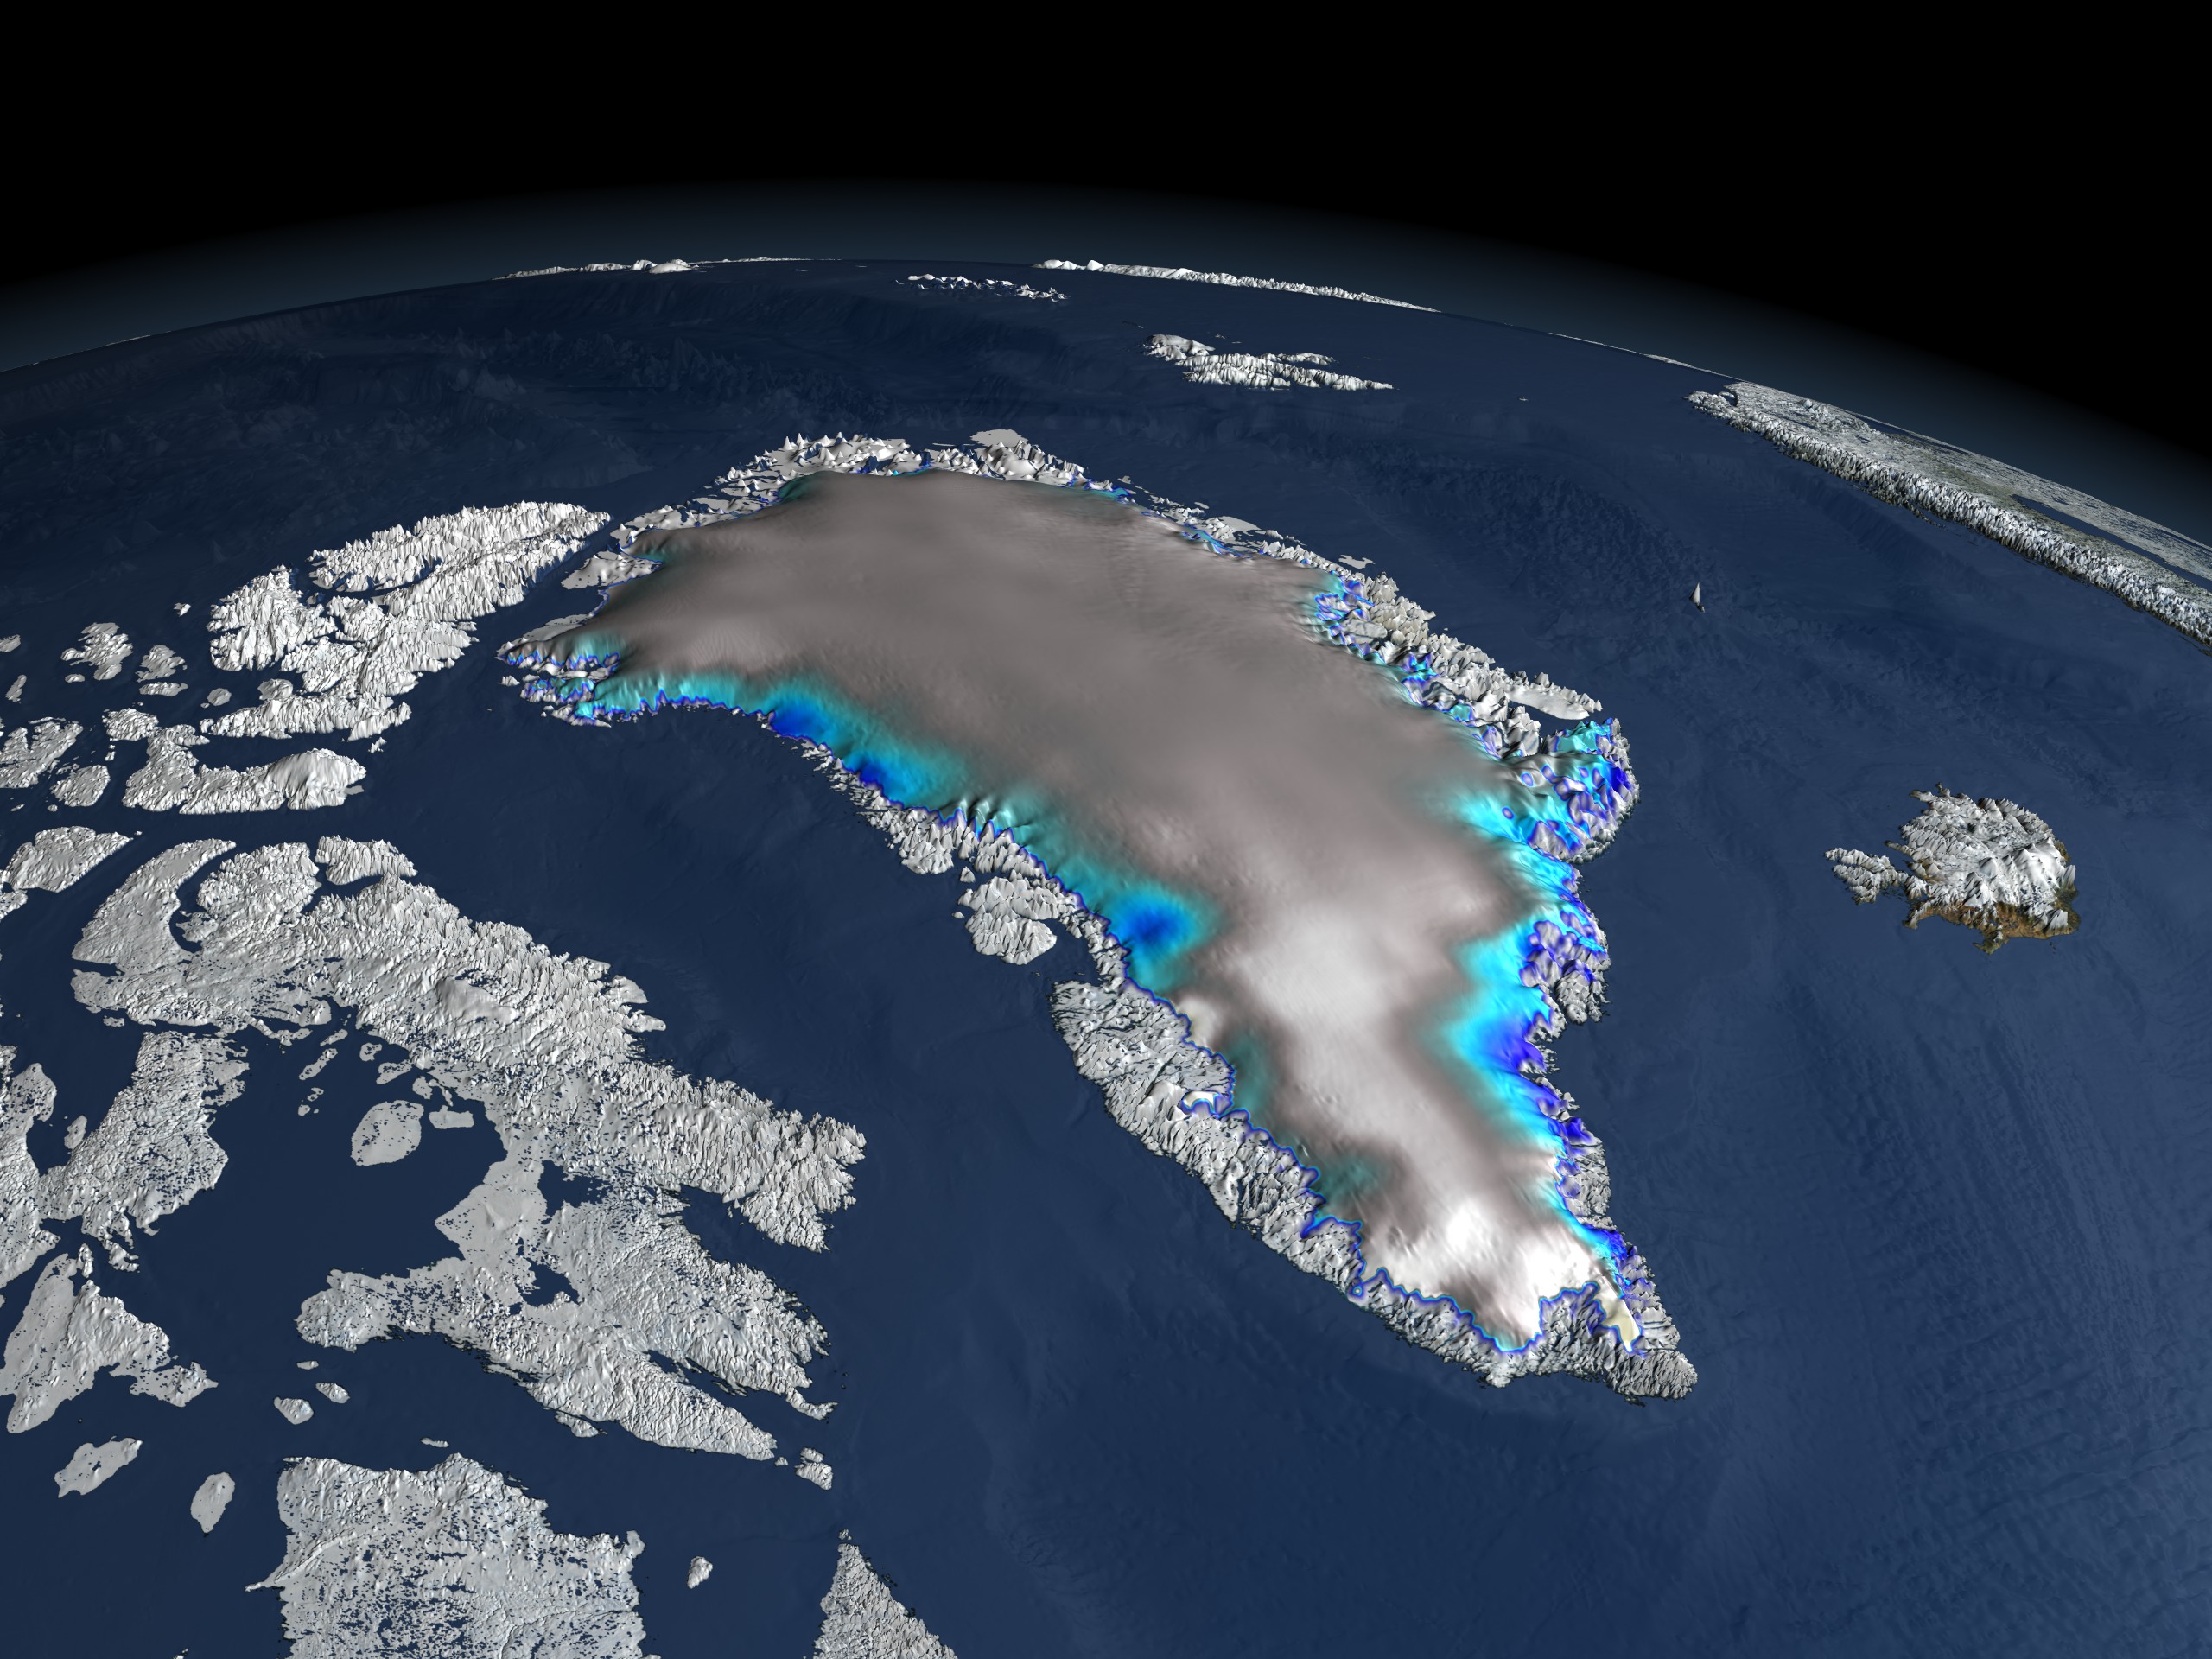 This image shows changes in the elevation over the Greenland ice sheet as colors displayed over topography of Greenland measured by ICESat.